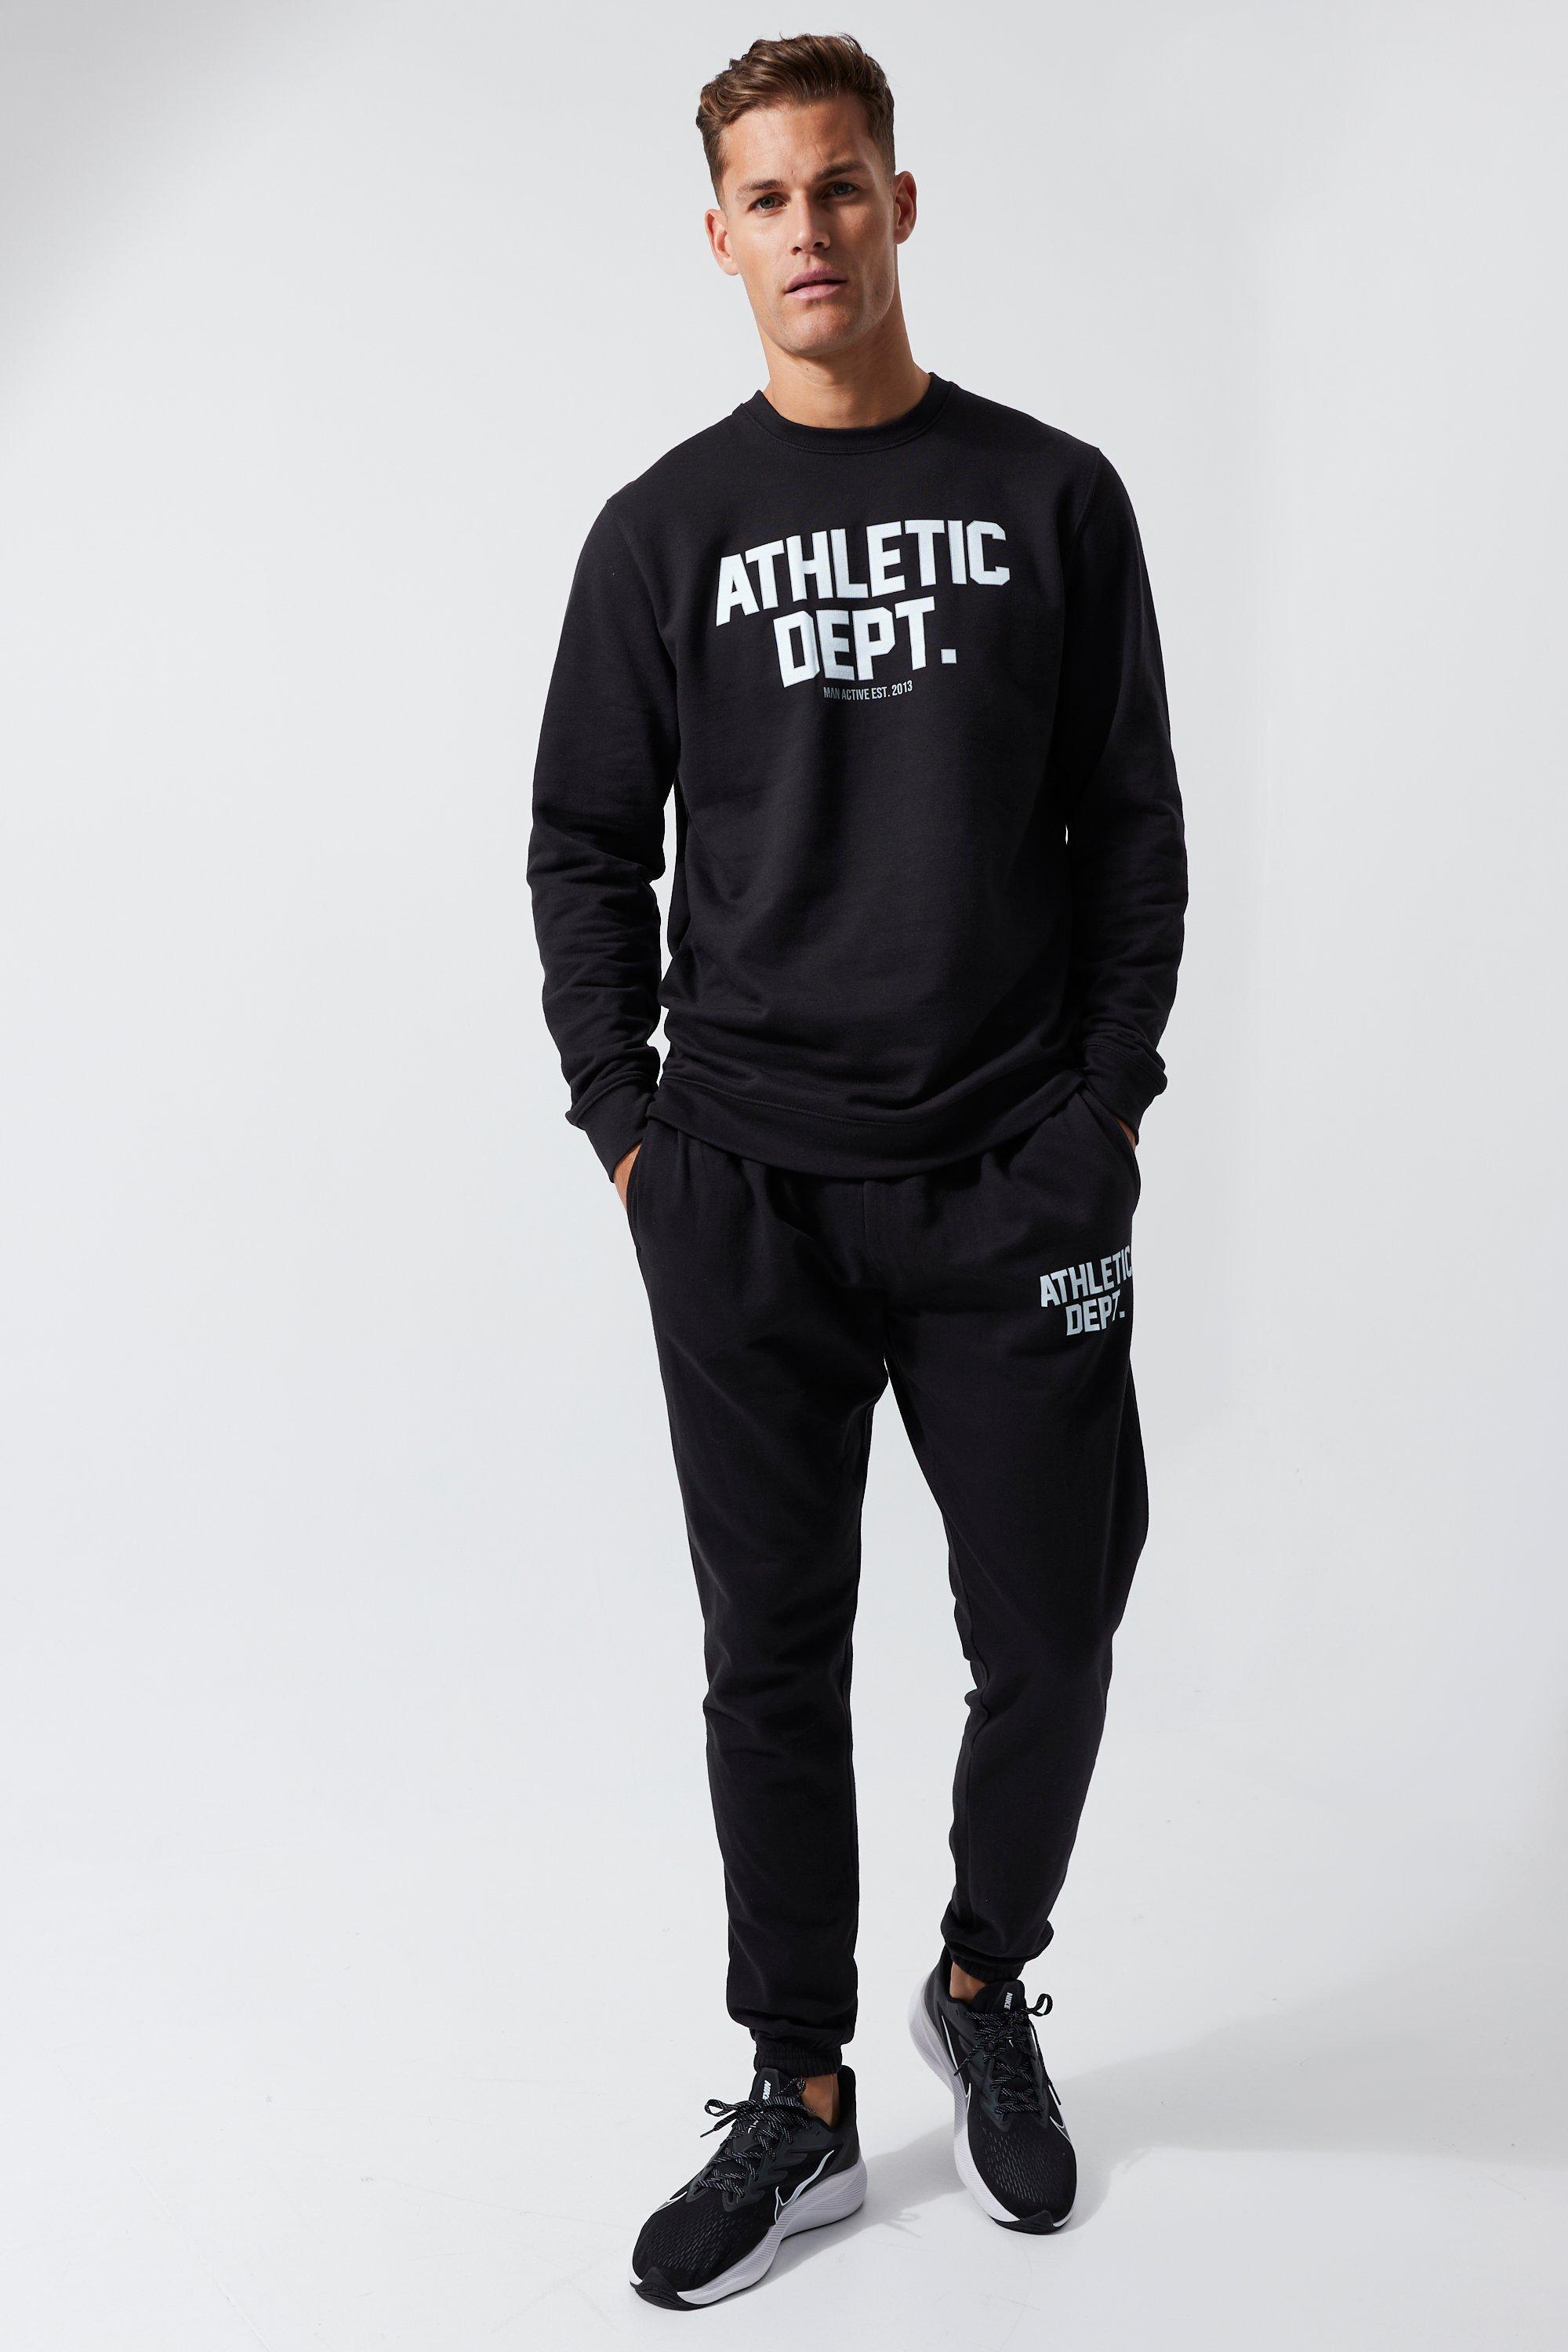 Boohoo Tall Man Active Athletic Dept Sweat Tracksuit in Black | Lyst